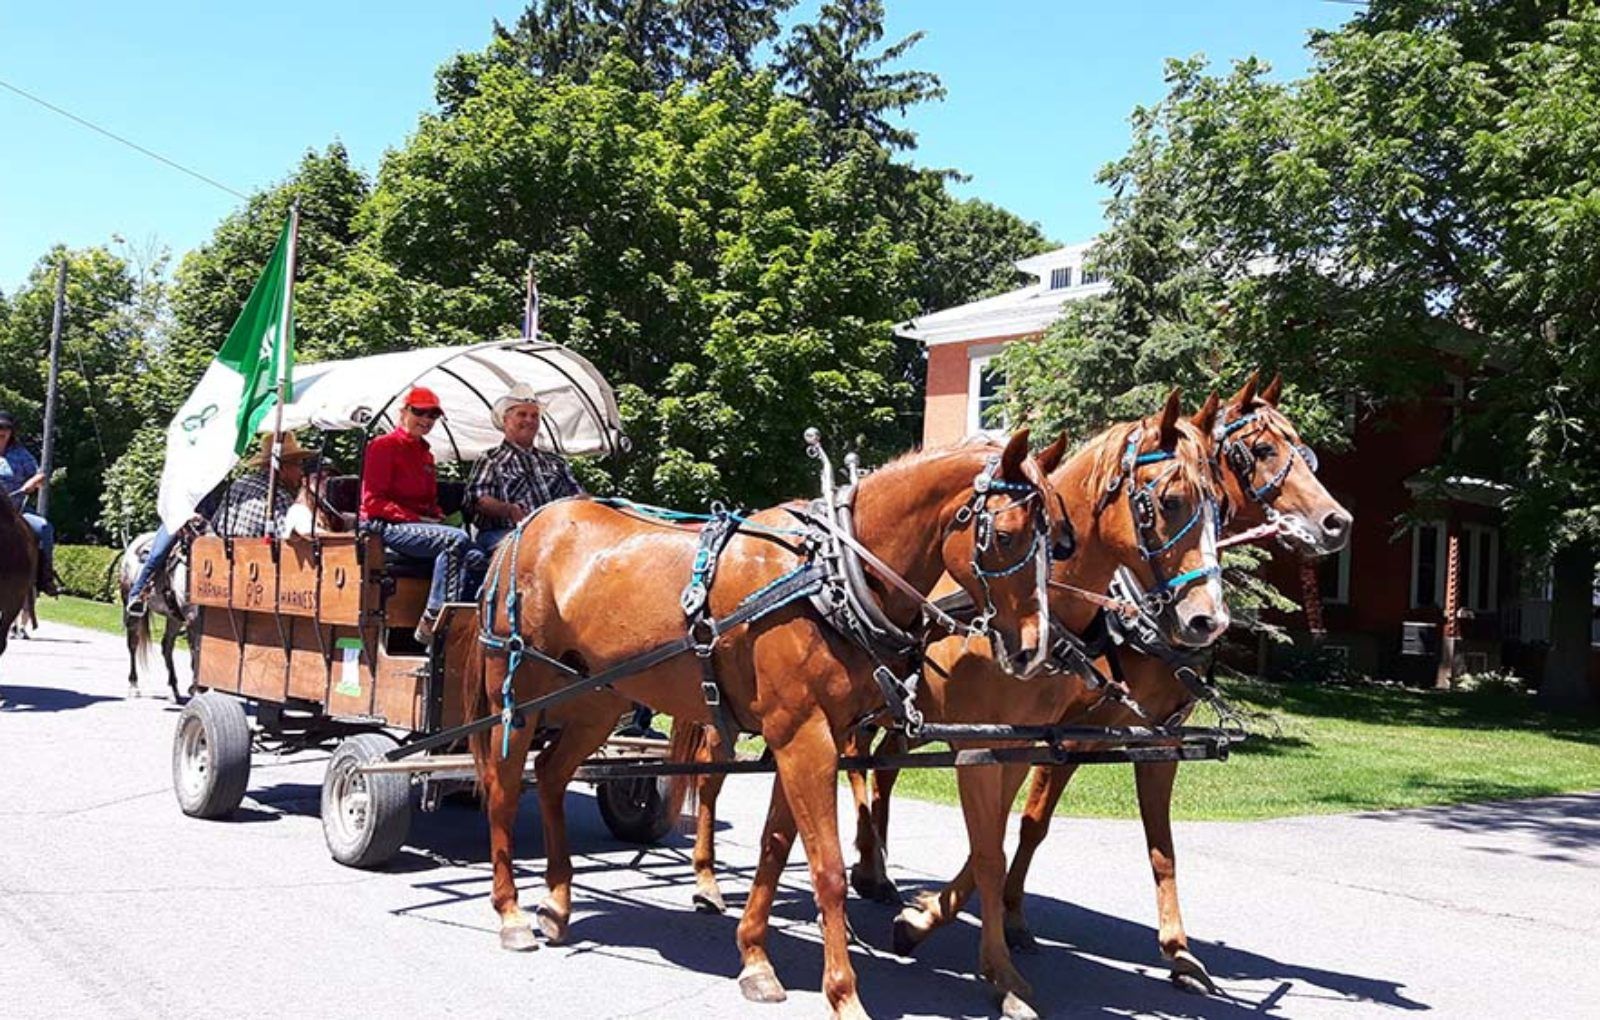 LS_July 10 2019 Horse and Buggy Parade (6)